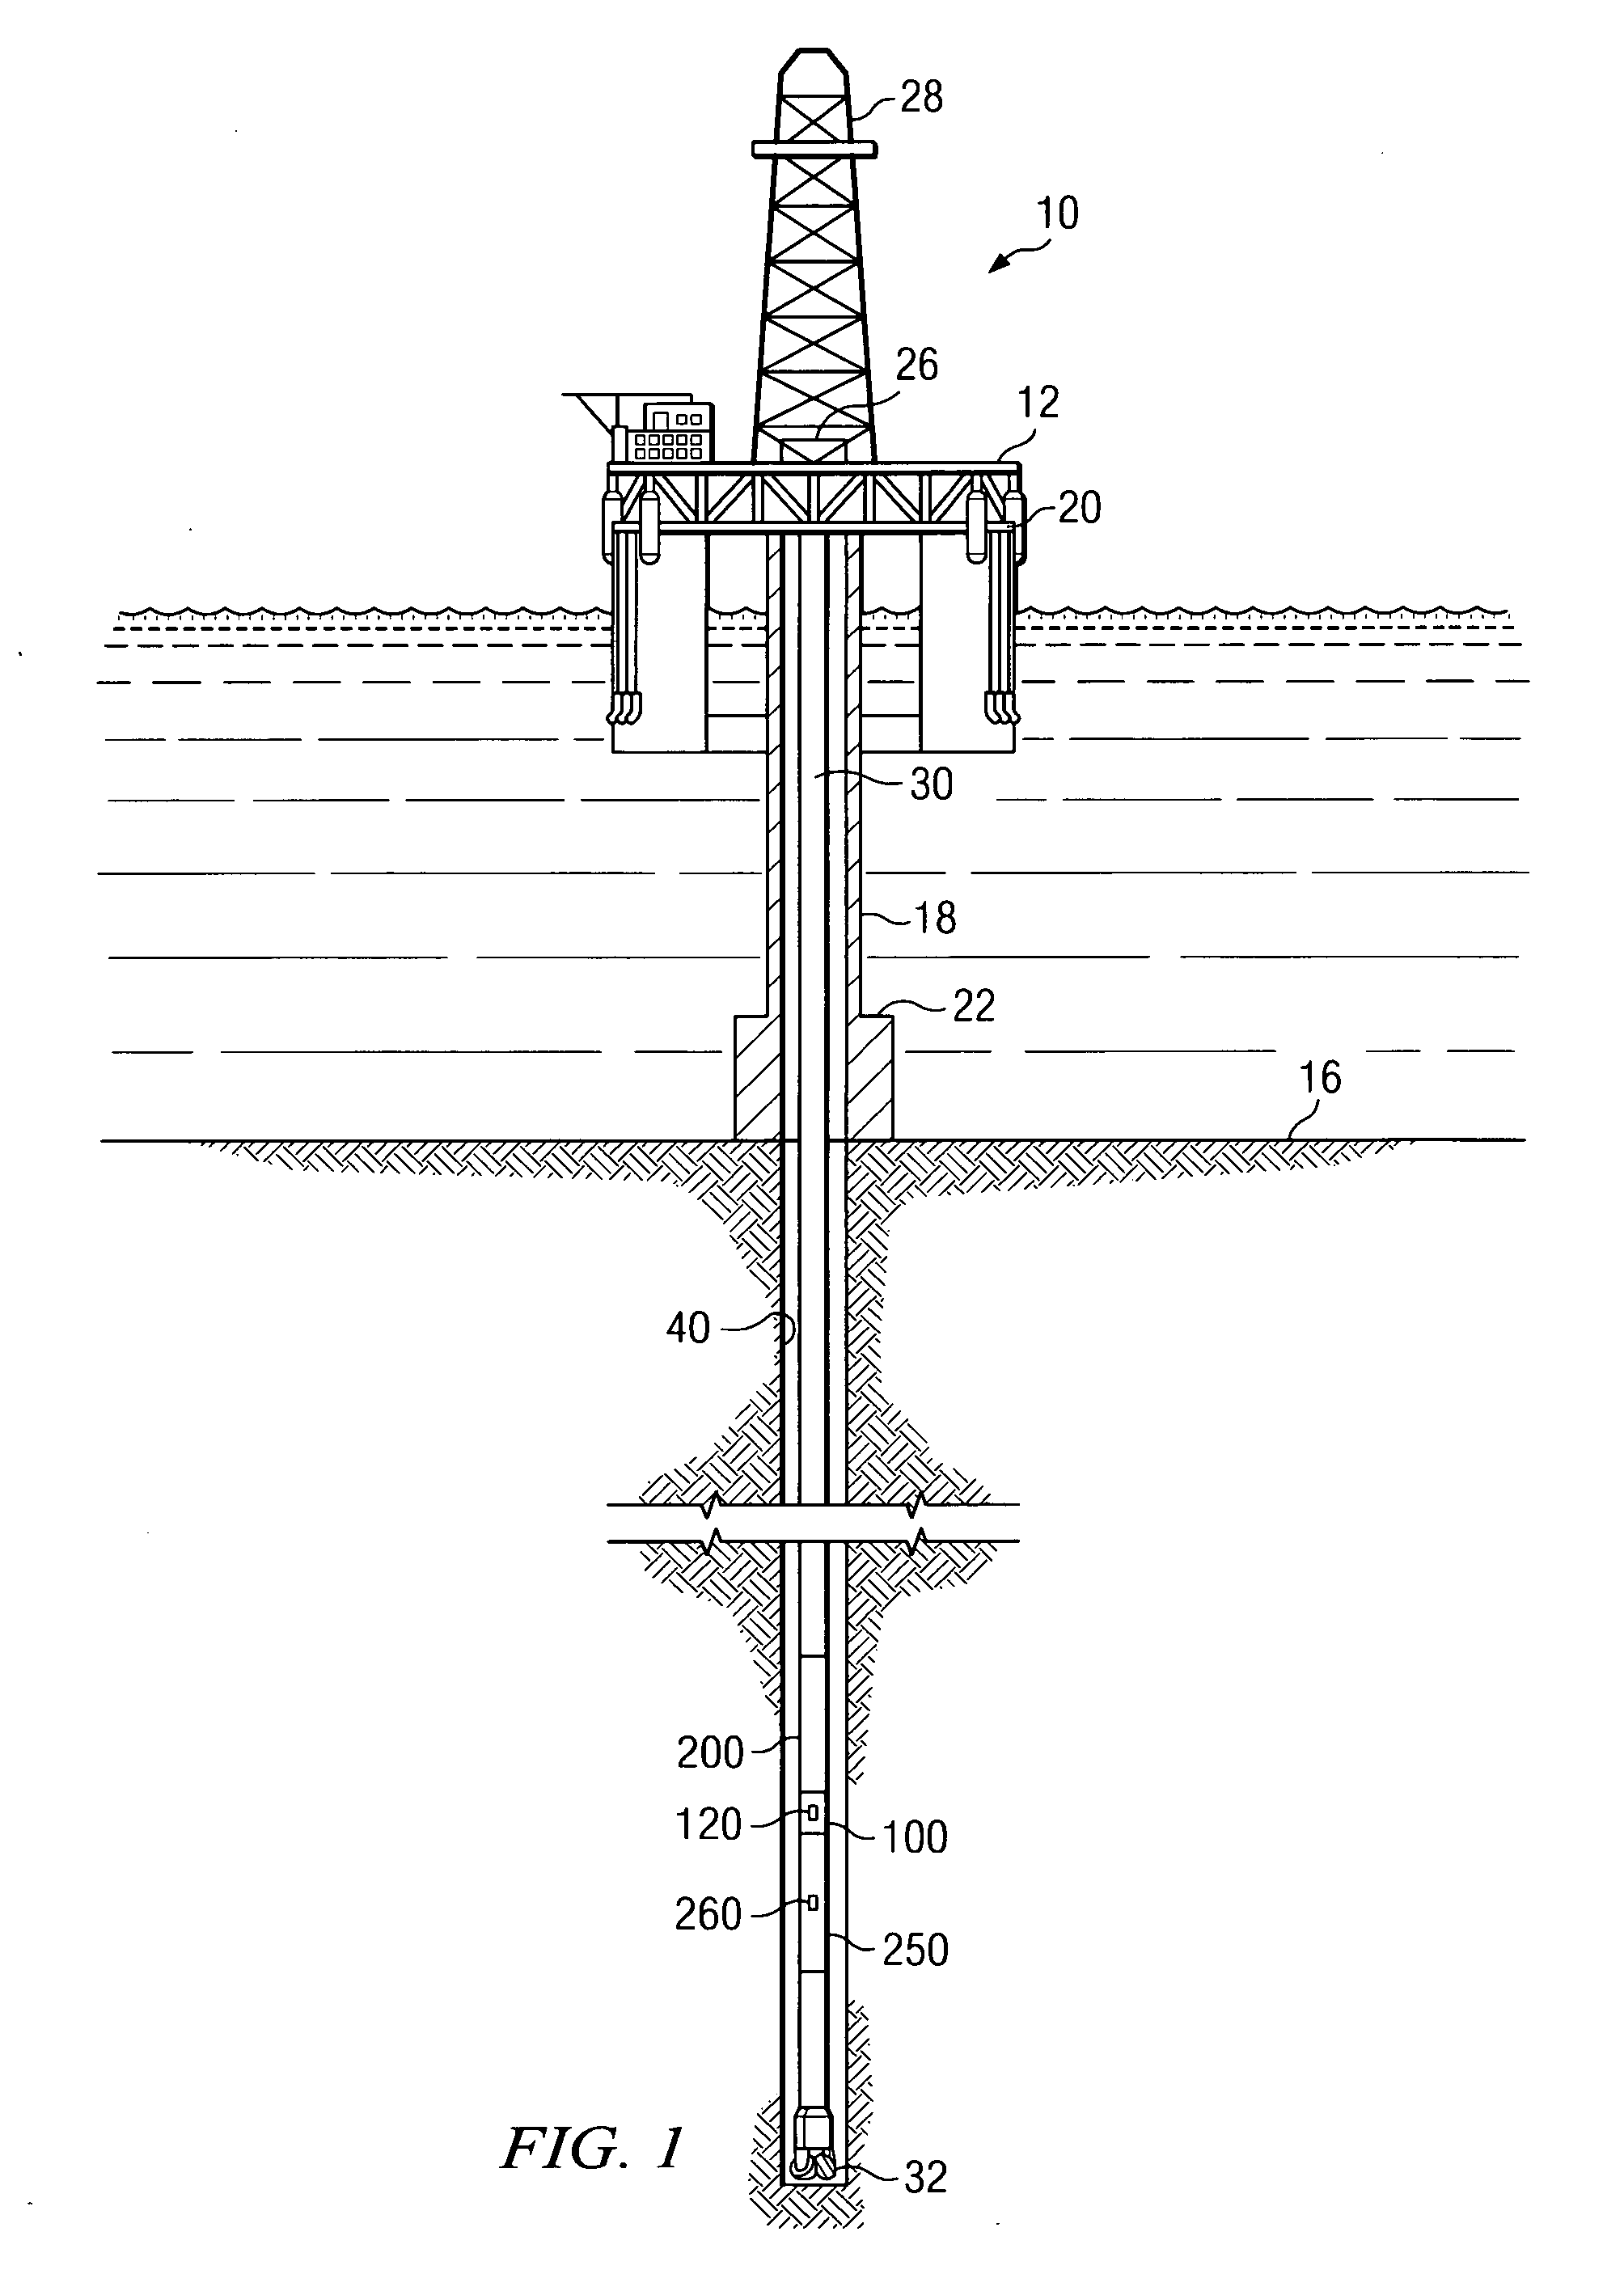 Measurement tool for obtaining tool face on a rotating drill collar